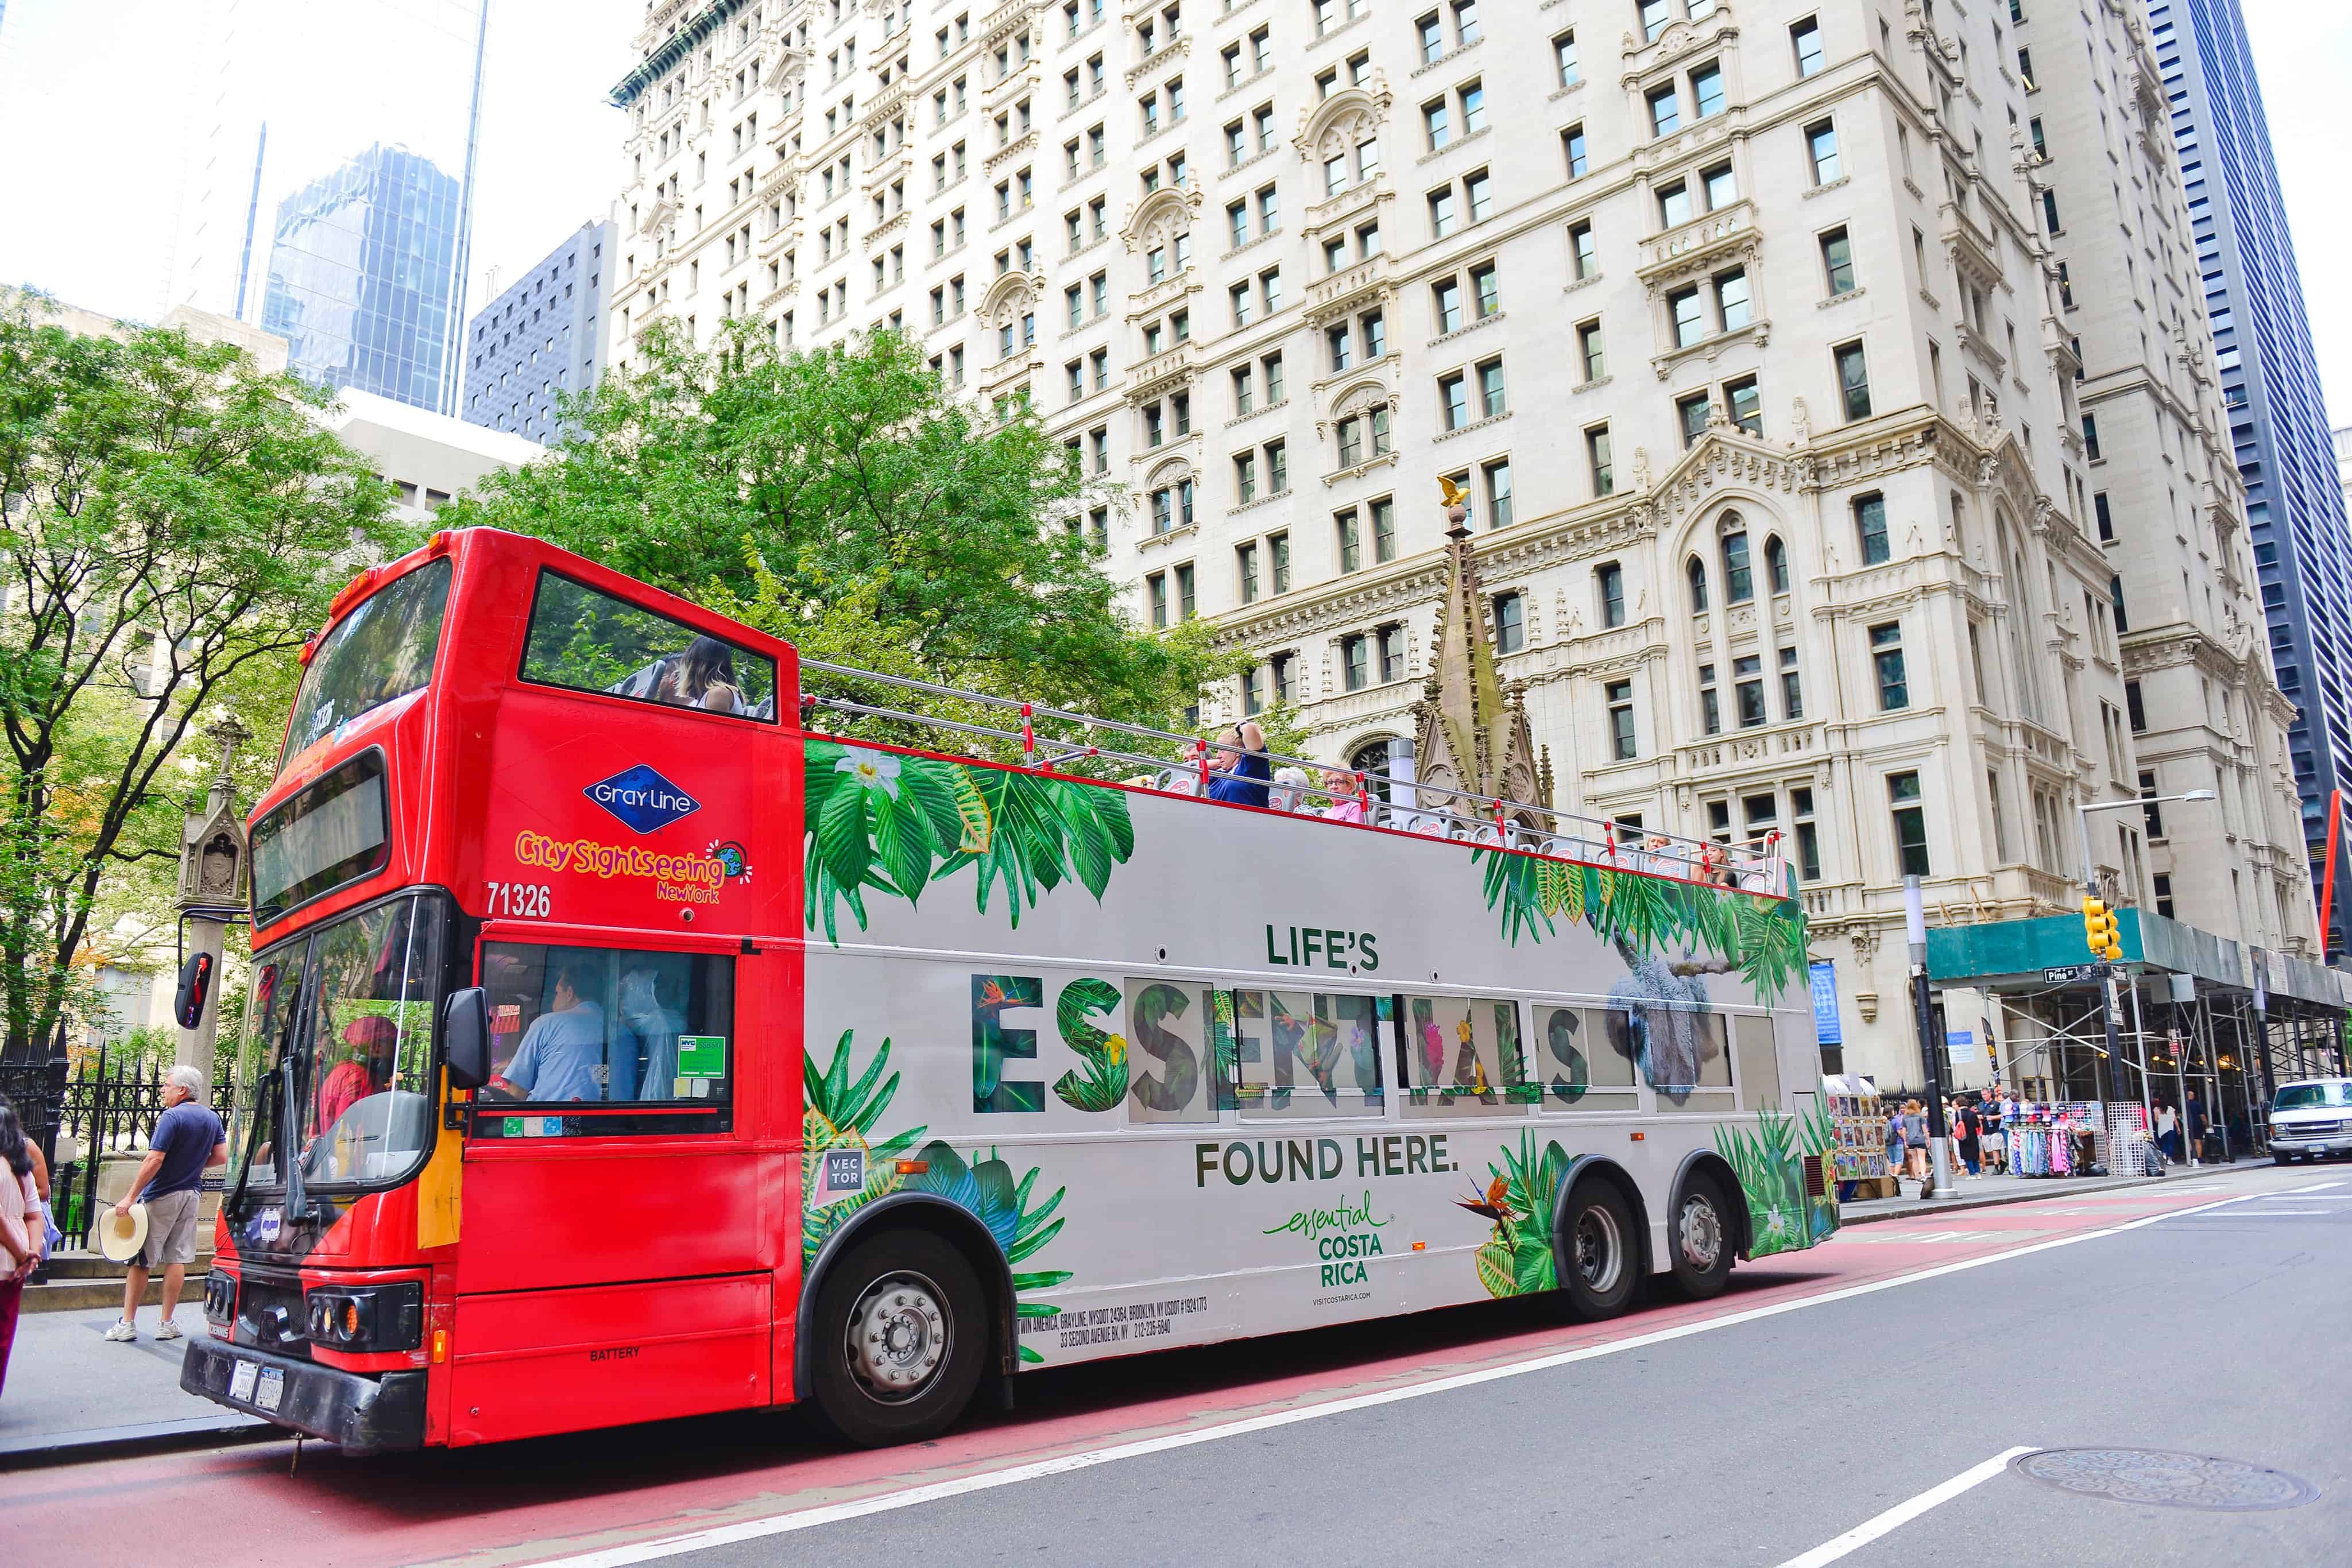 'Only the Essentials' Costa Rica bus in NYC